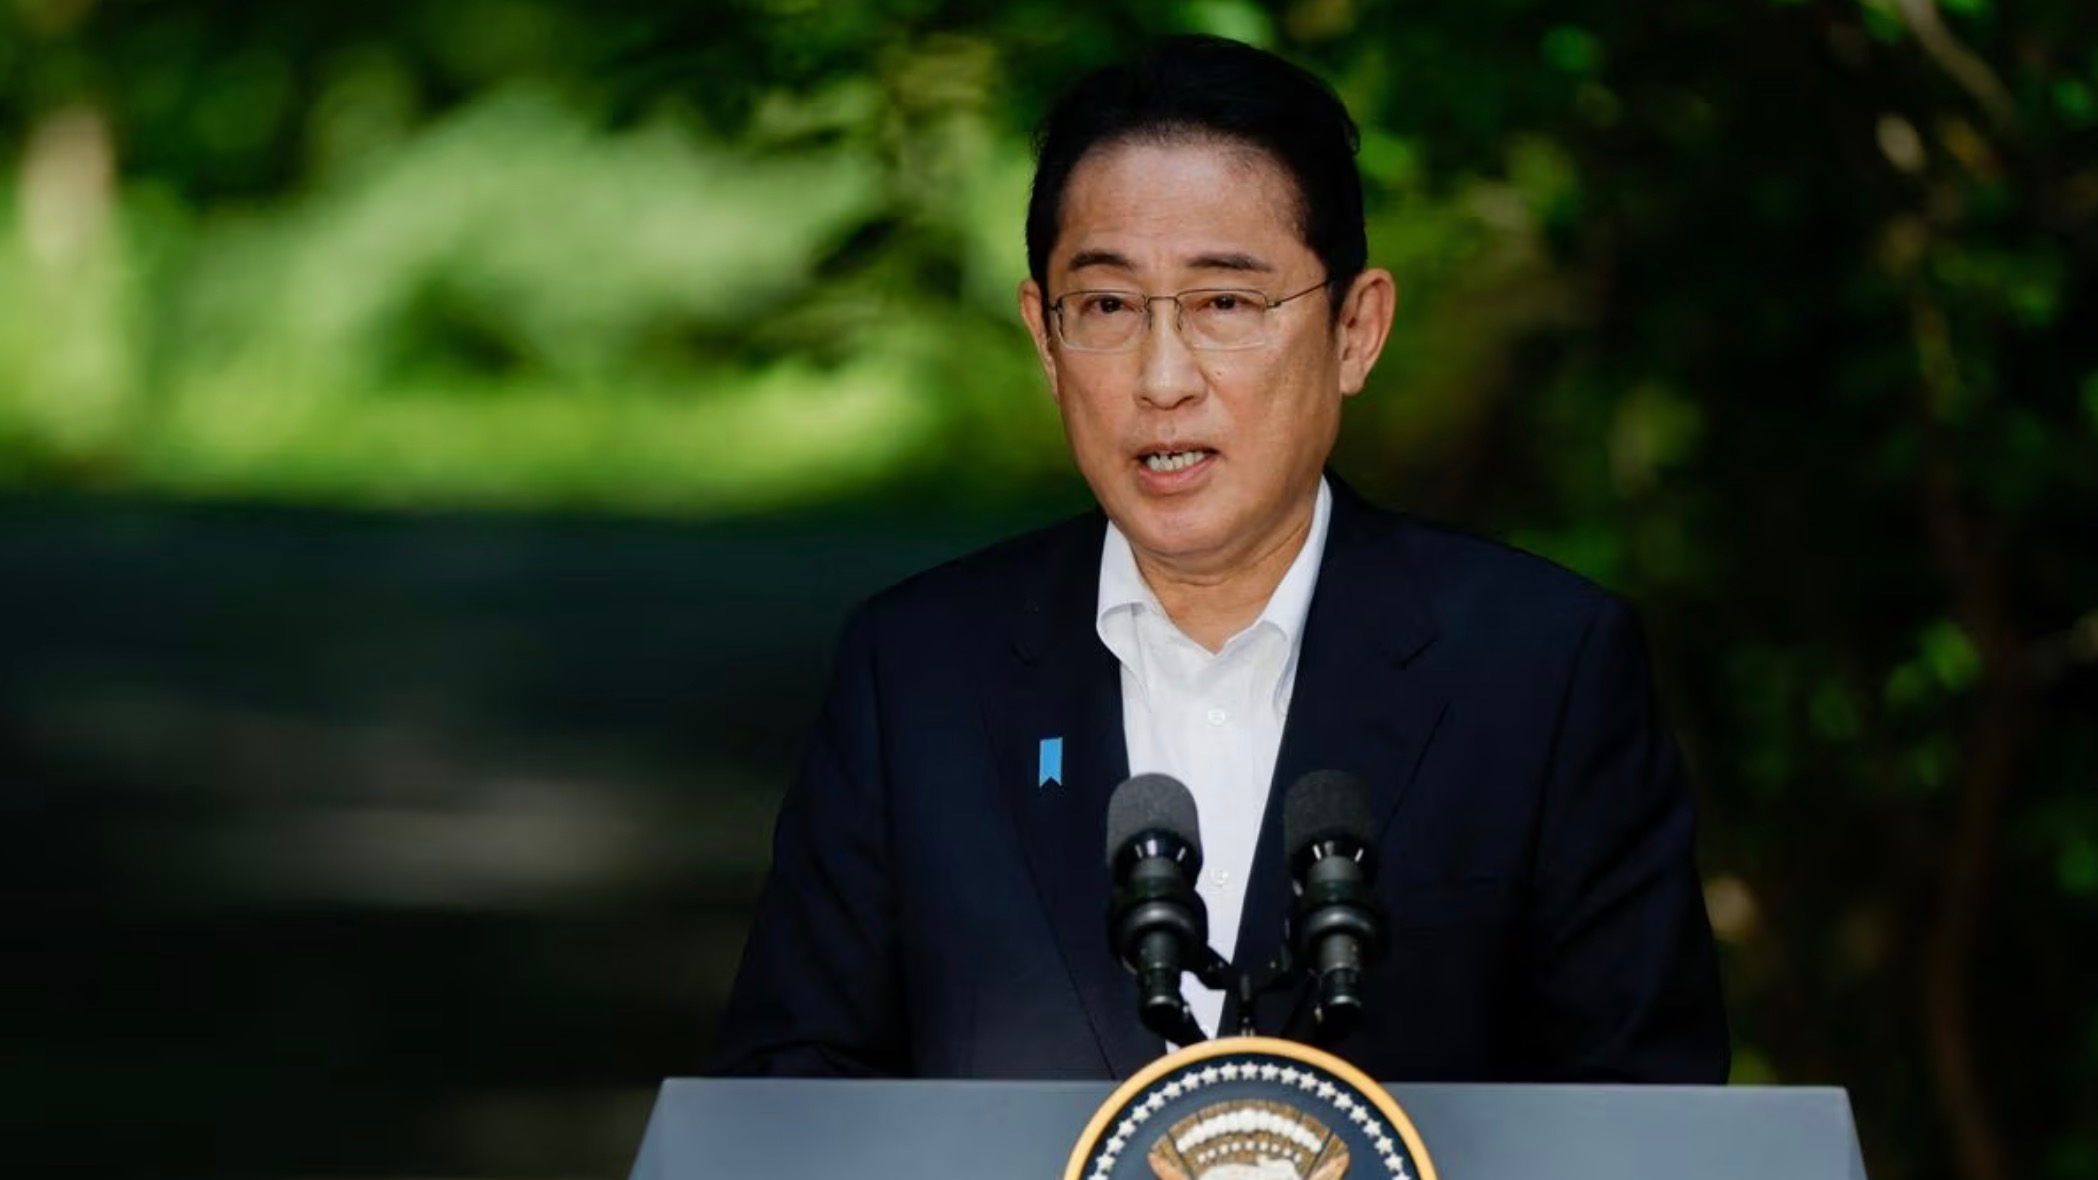 Japanese Prime Minister Fumio Kishida speaks during a press conference at Camp David near Thurmont, Maryland, U.S., August 18, 2023. /Reuters